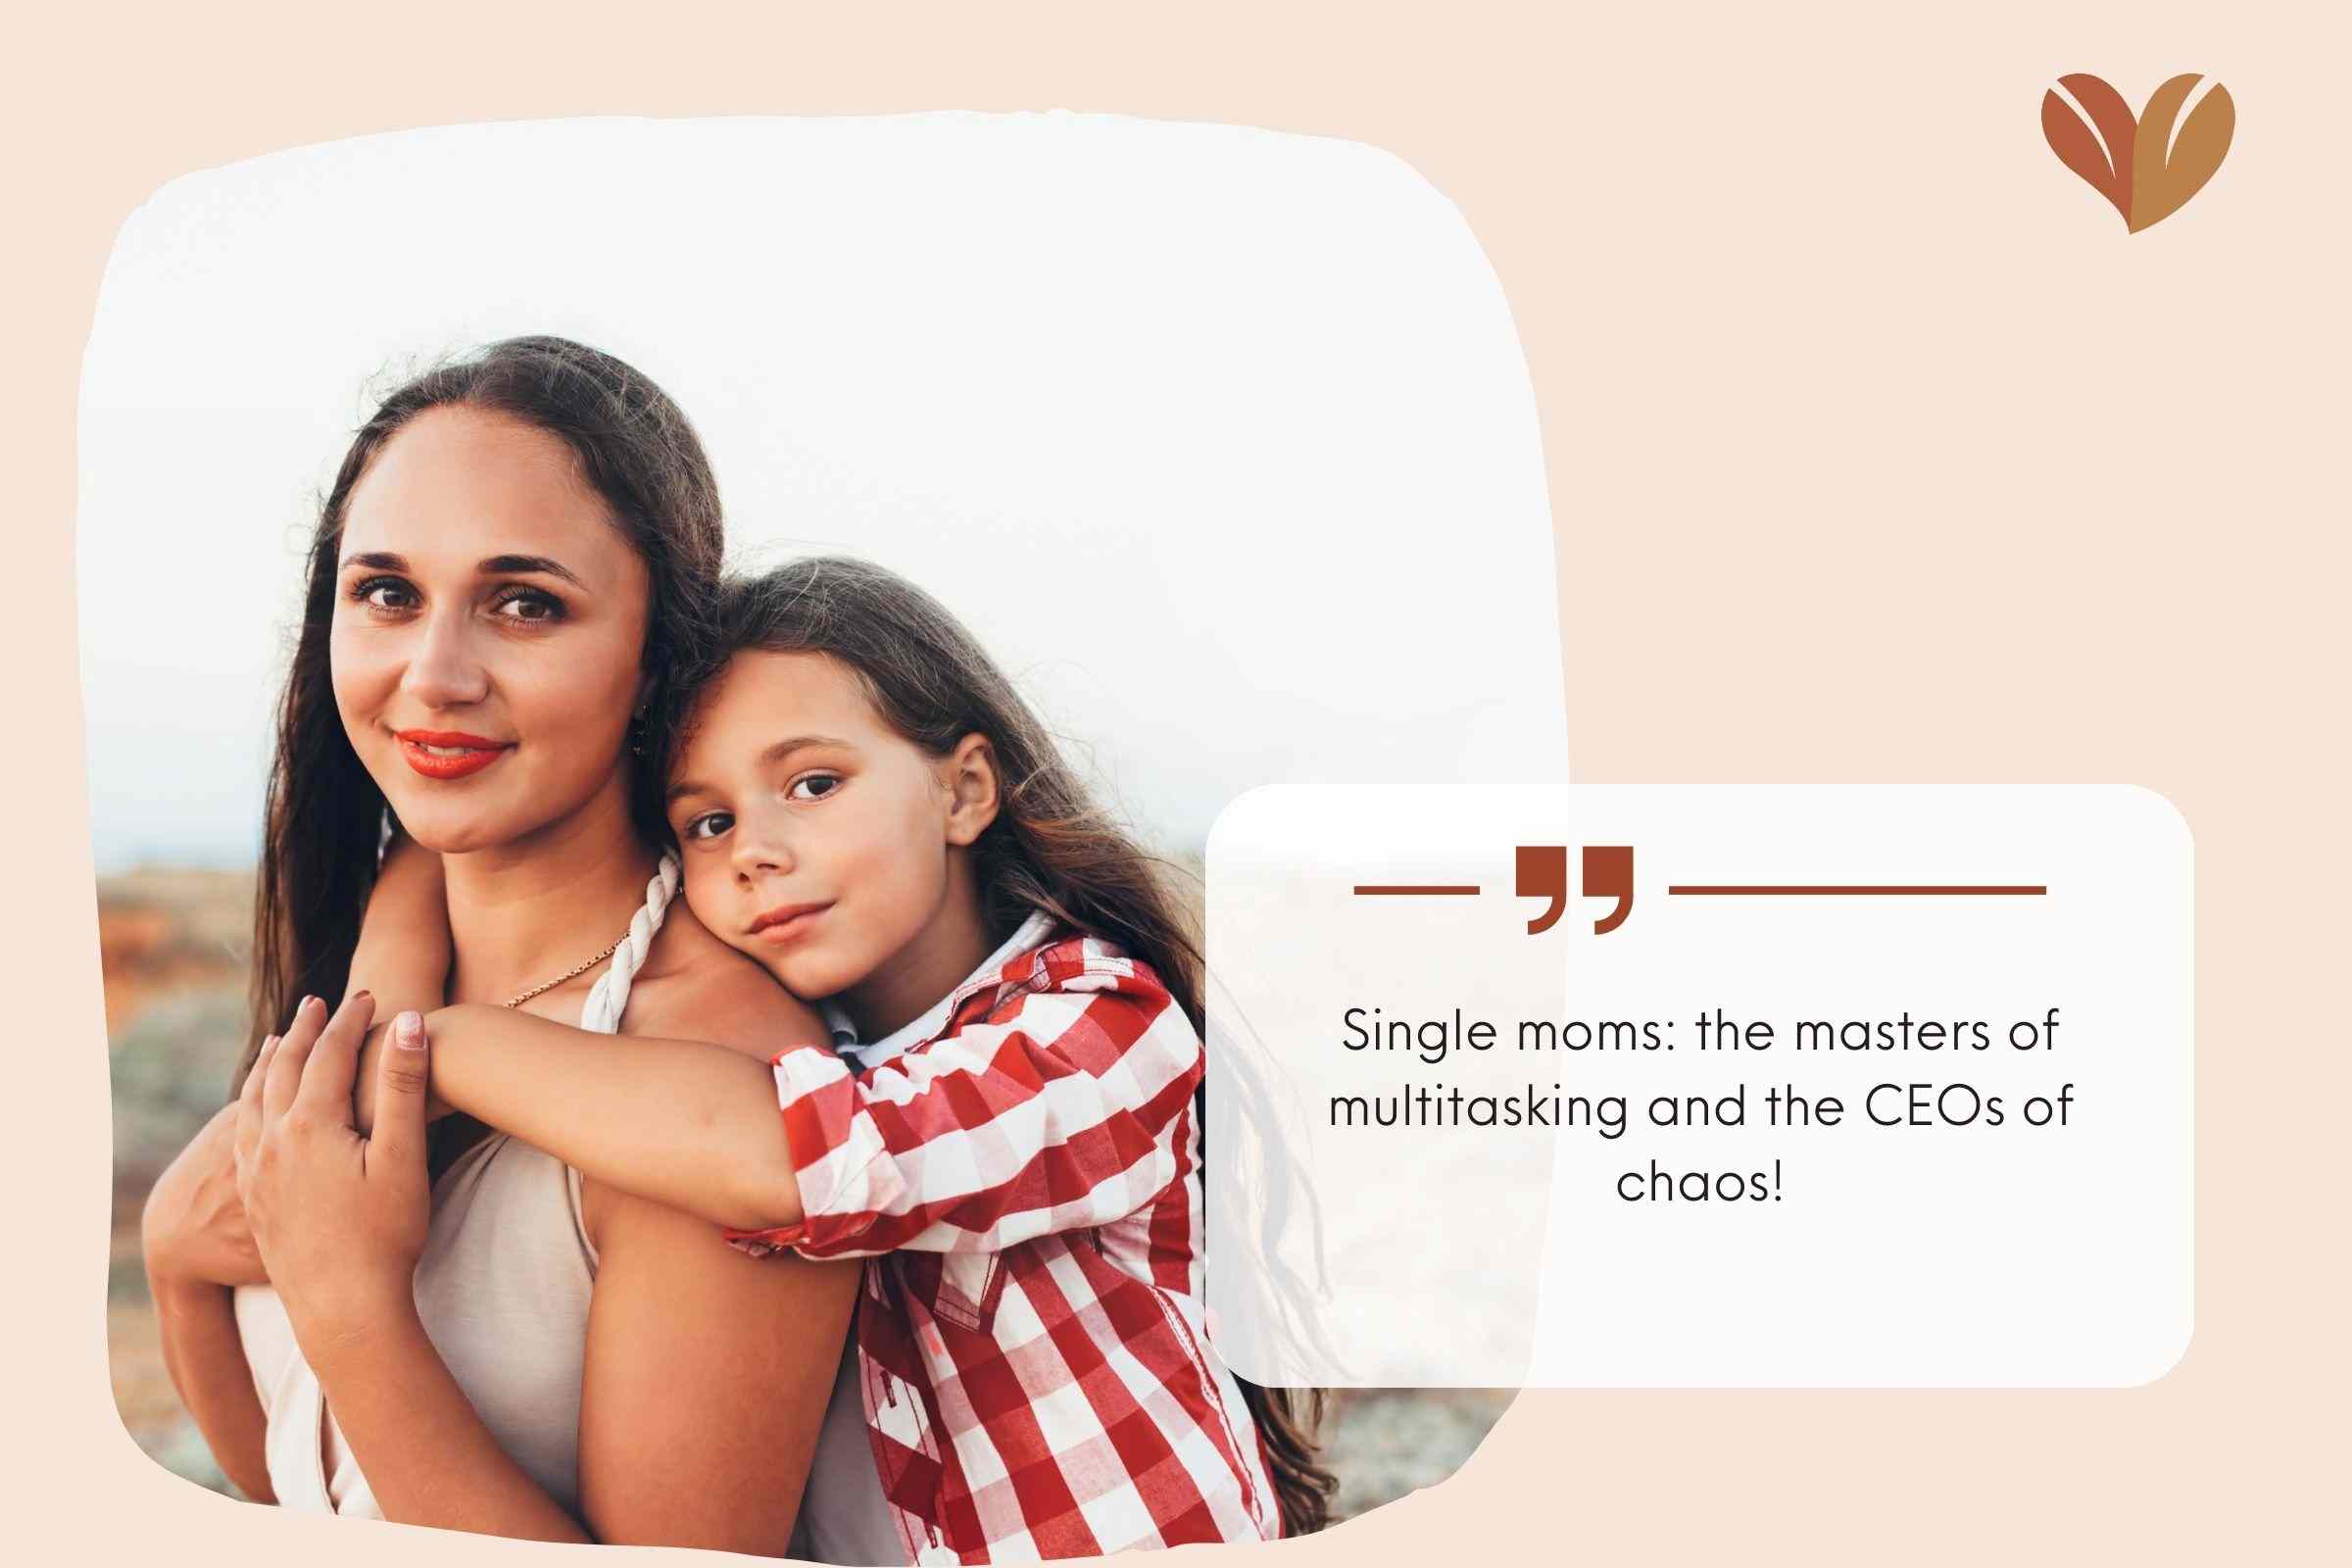 Best Funny Single Mom Quotes - Single moms: the masters of multitasking and the CEOs of chaos!